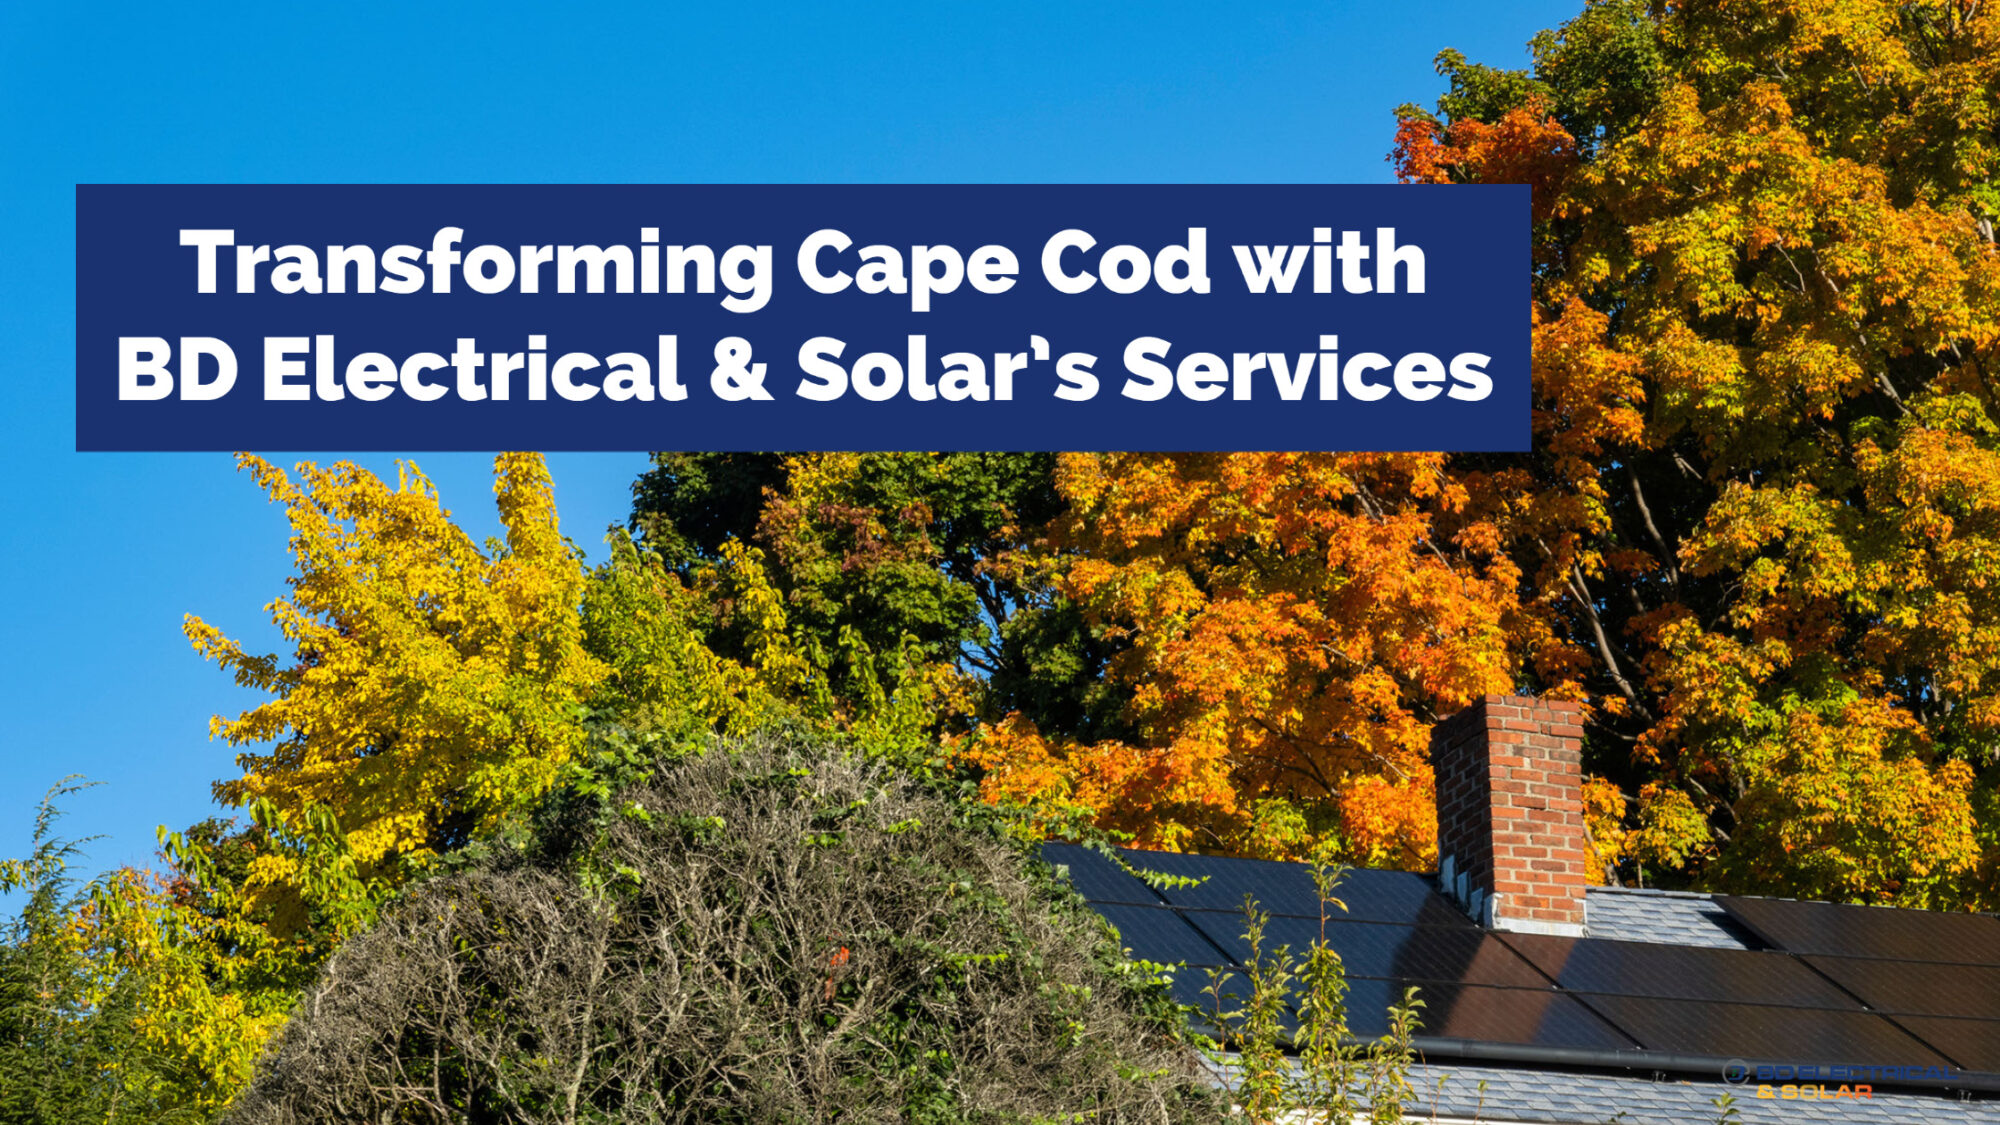 Text: Transforming Cape Cod with BD Electrical & Solar's Services